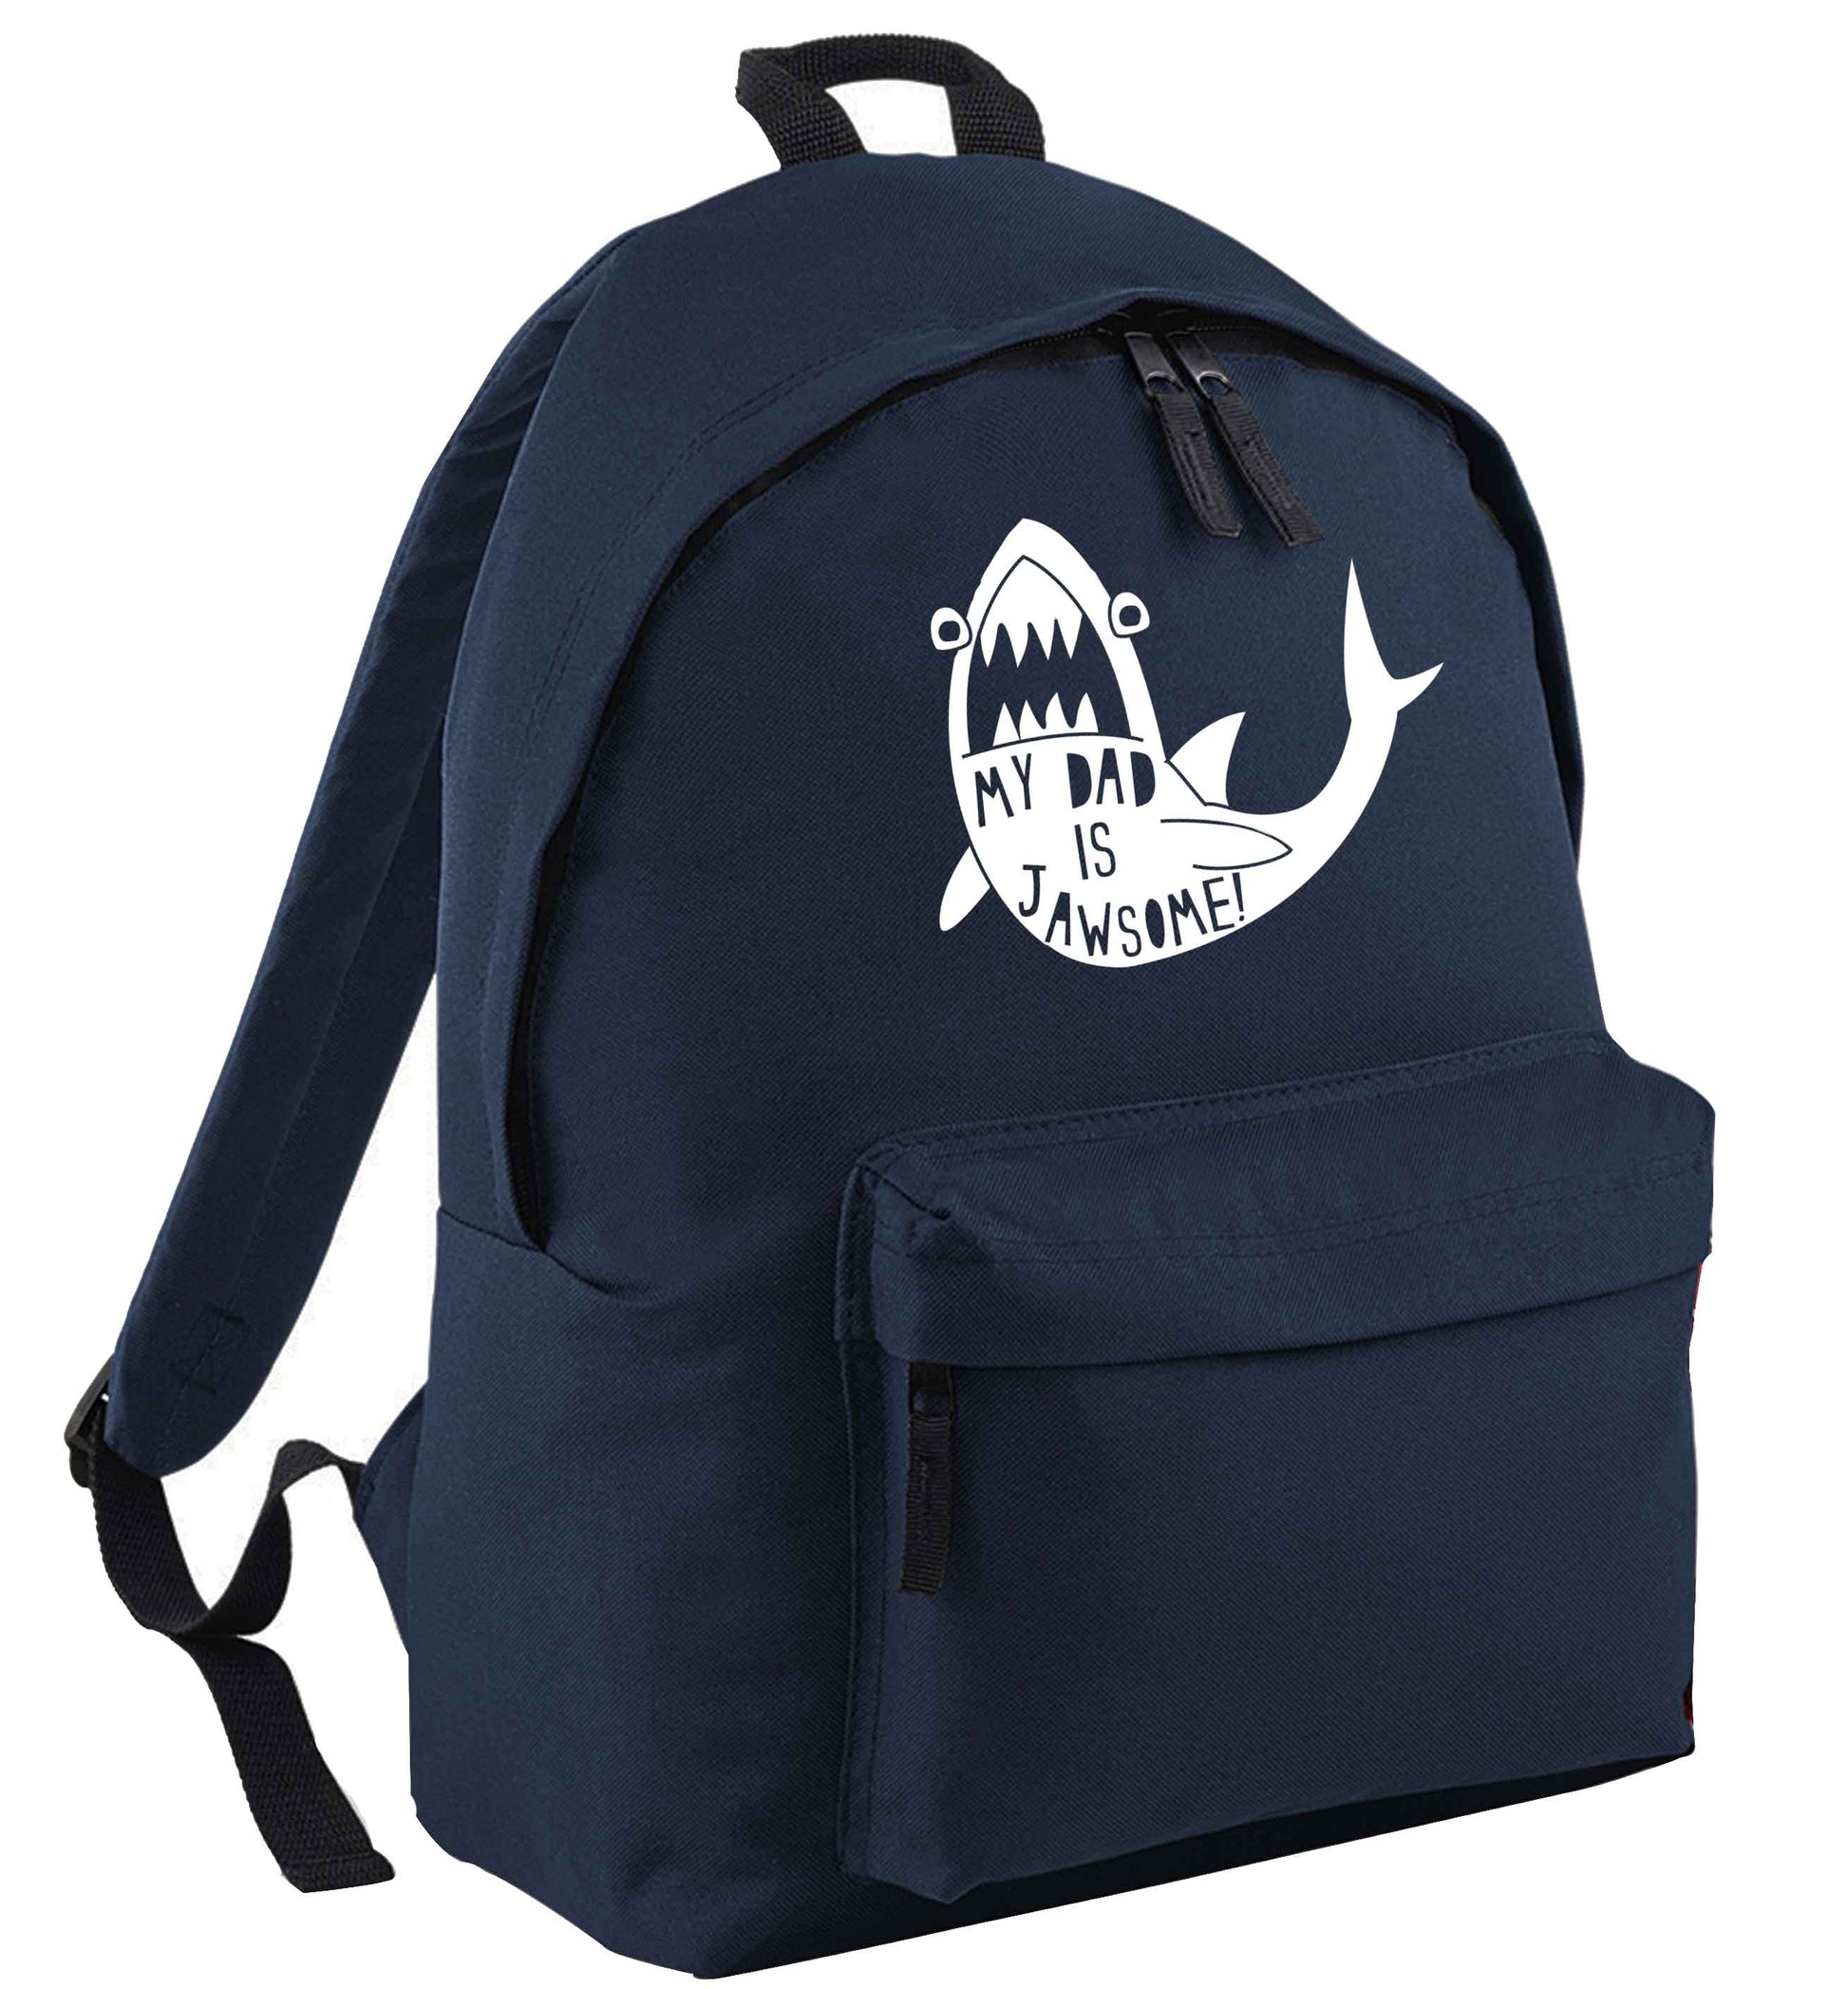 My Dad is jawsome navy adults backpack